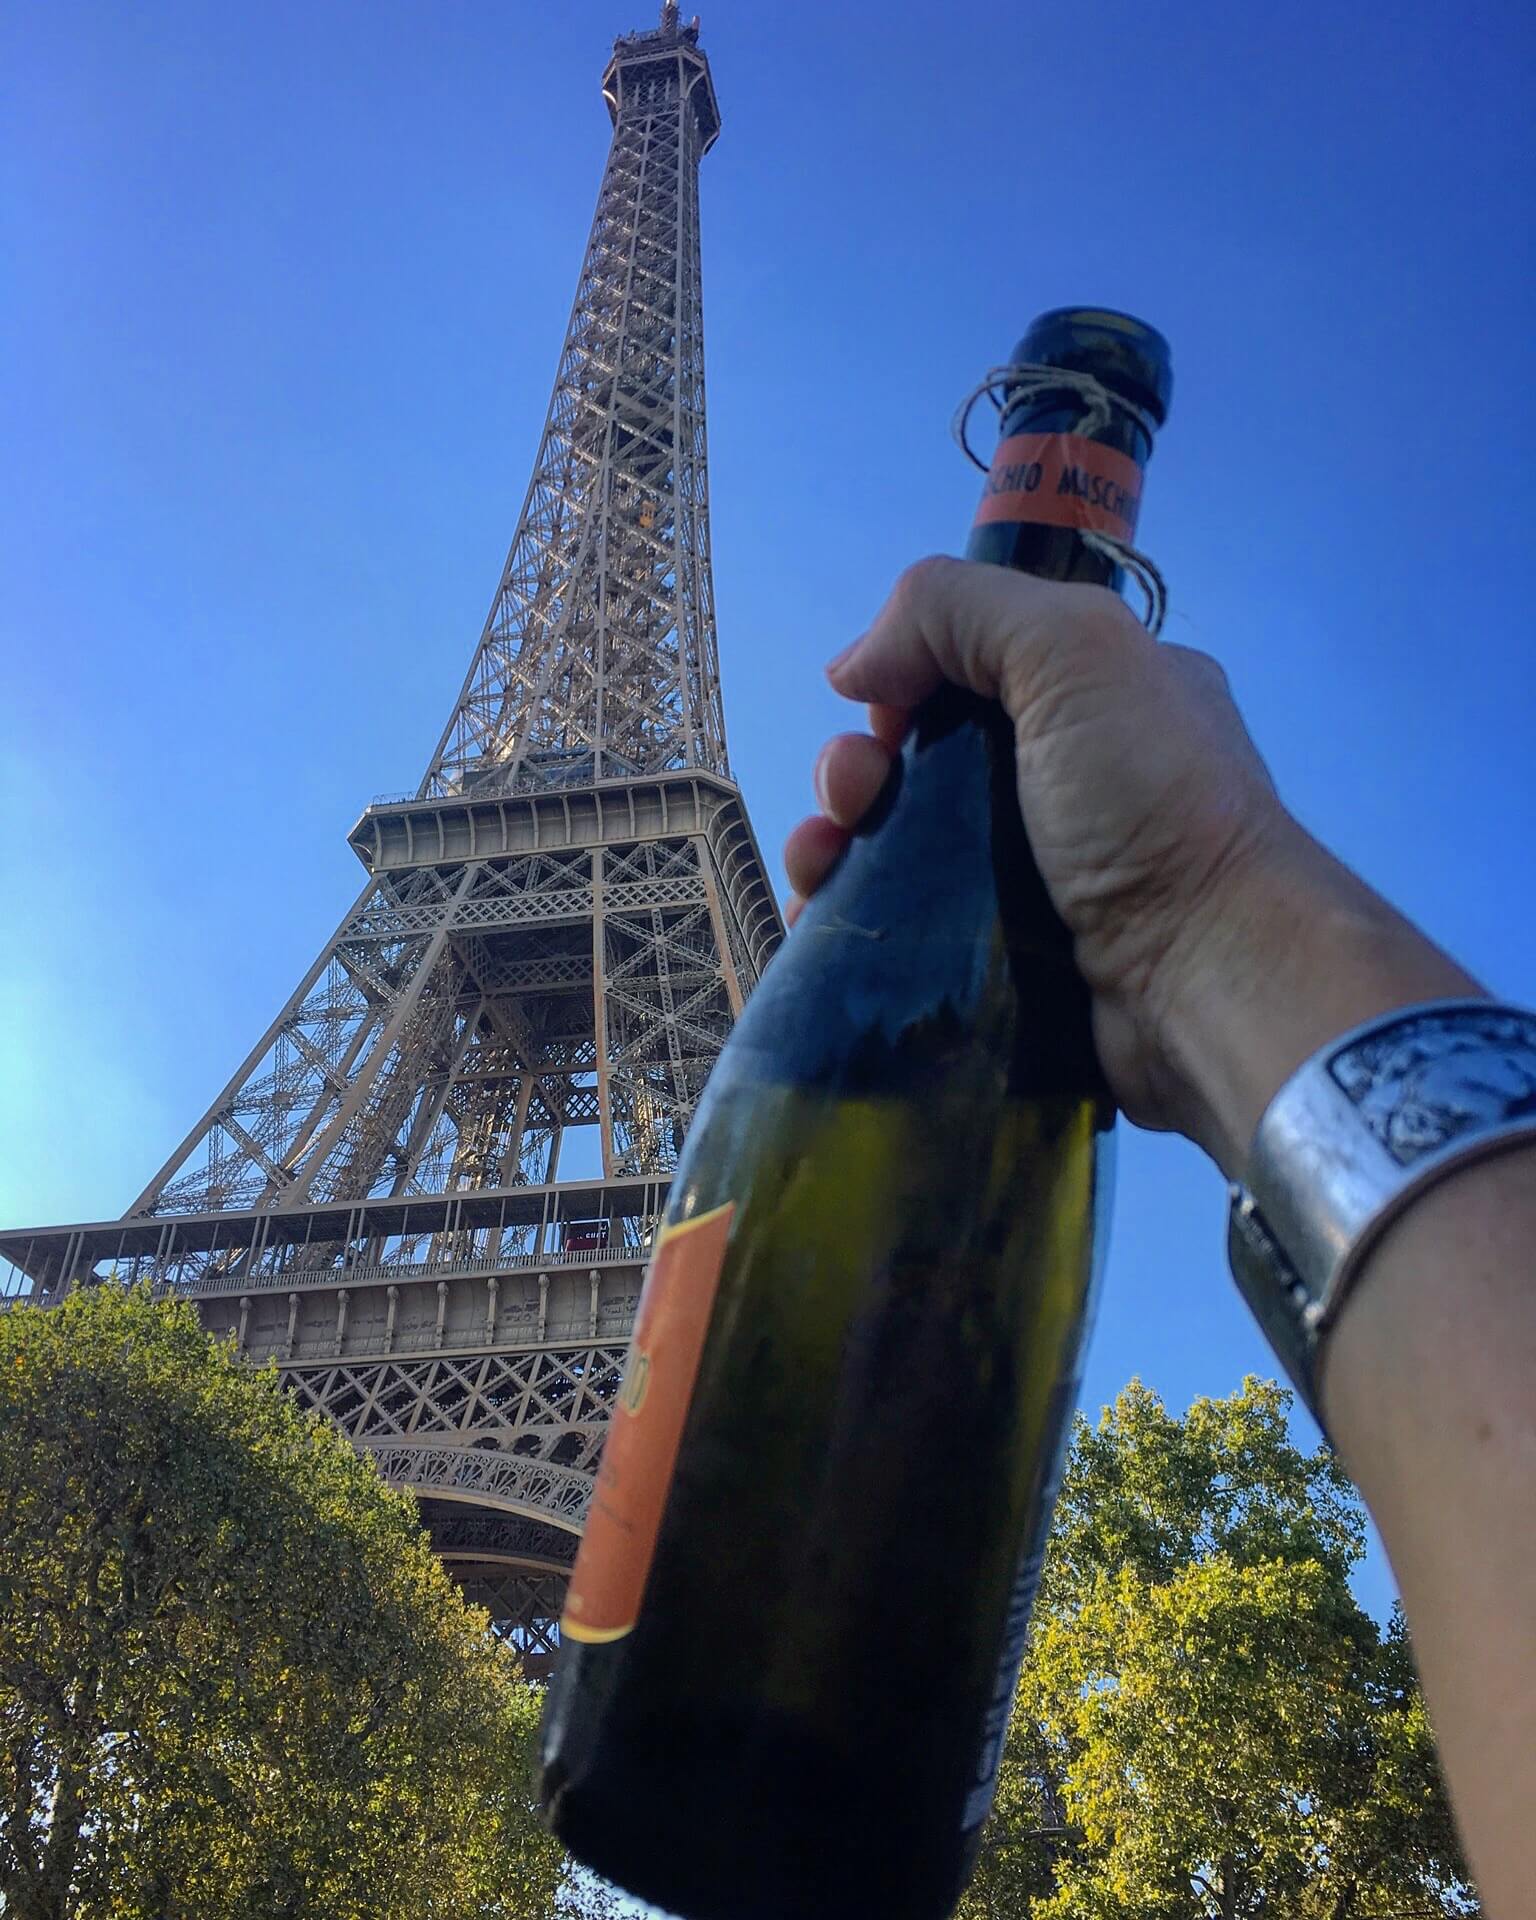 Holding up a Champagne bottle with the Eiffel Tower and blue sky